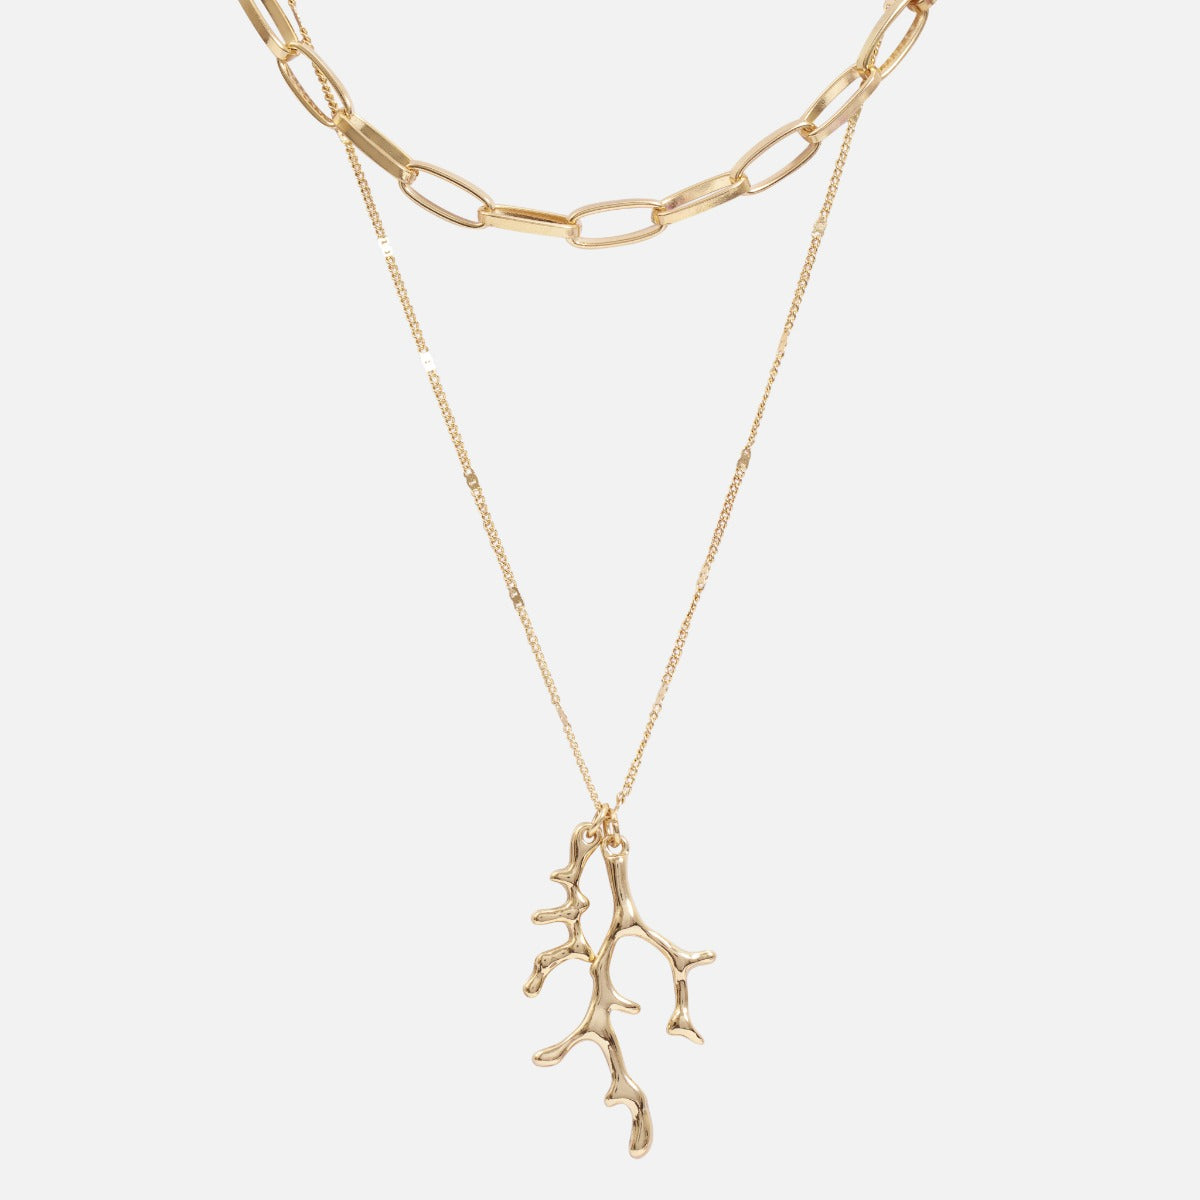 Two-chain golden pendant with seaweed charm